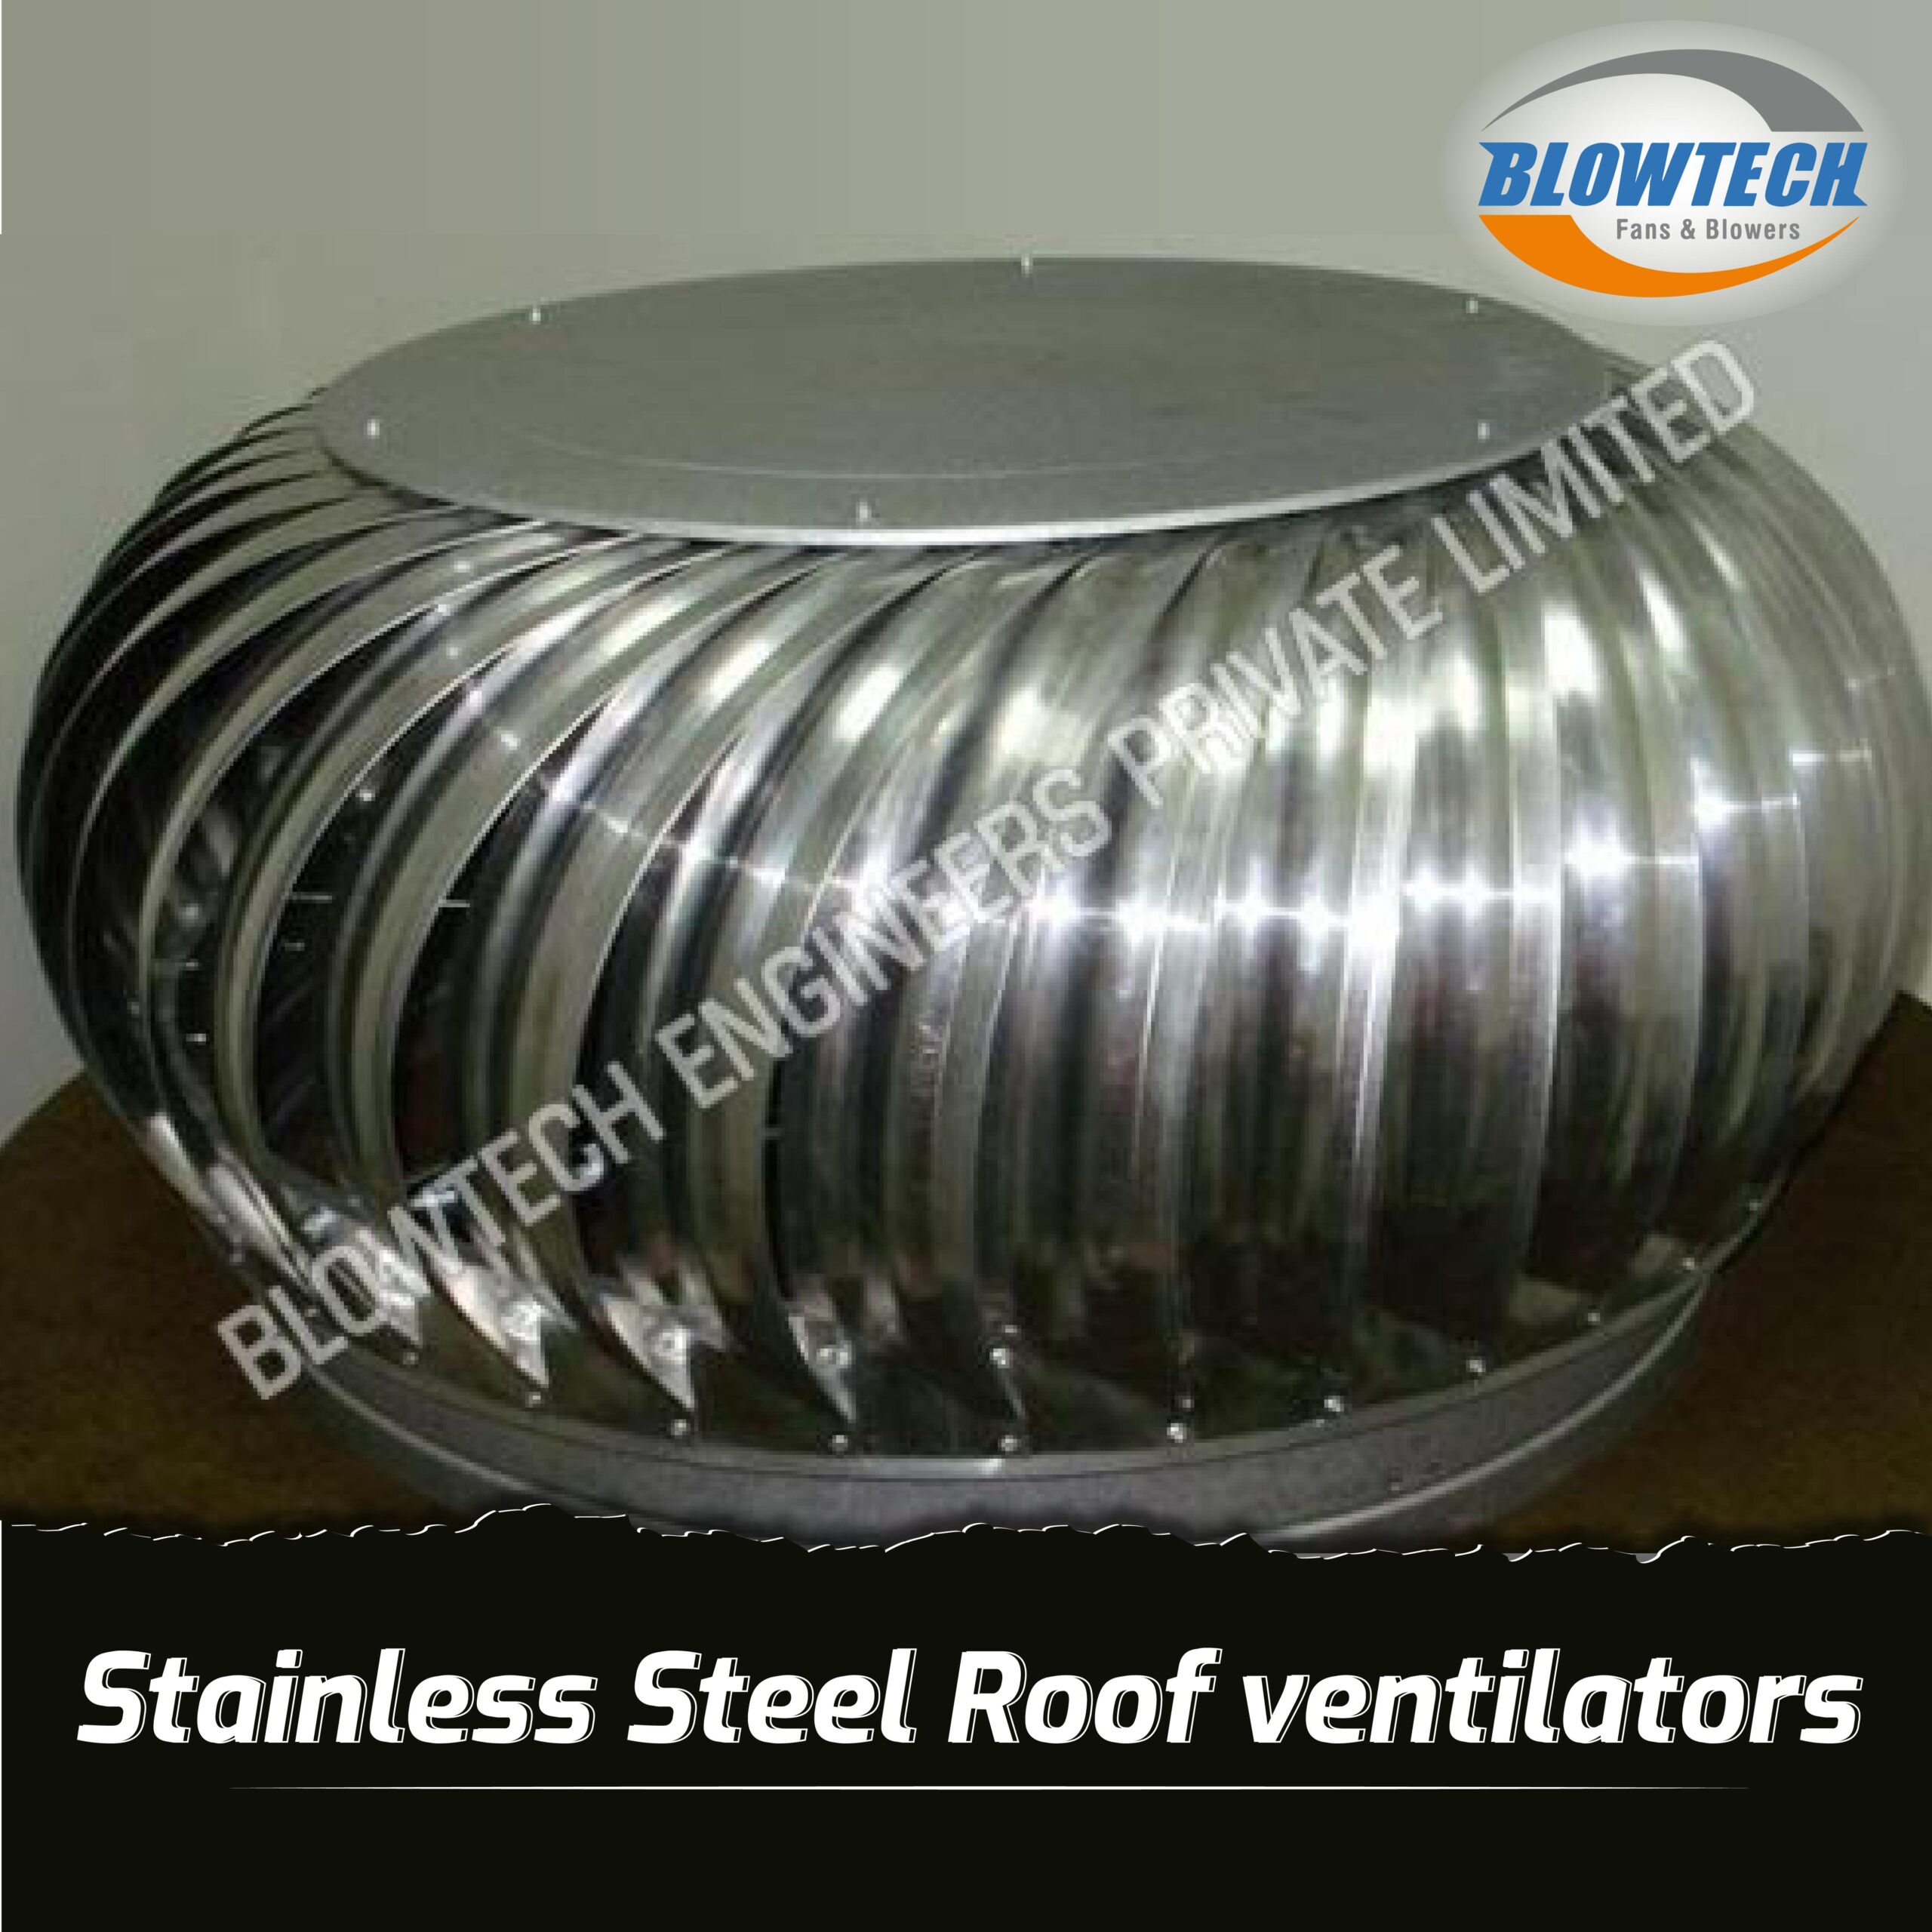 Stainless Steel Roof ventilators  manufacturer, supplier and exporter in Mumbai, India